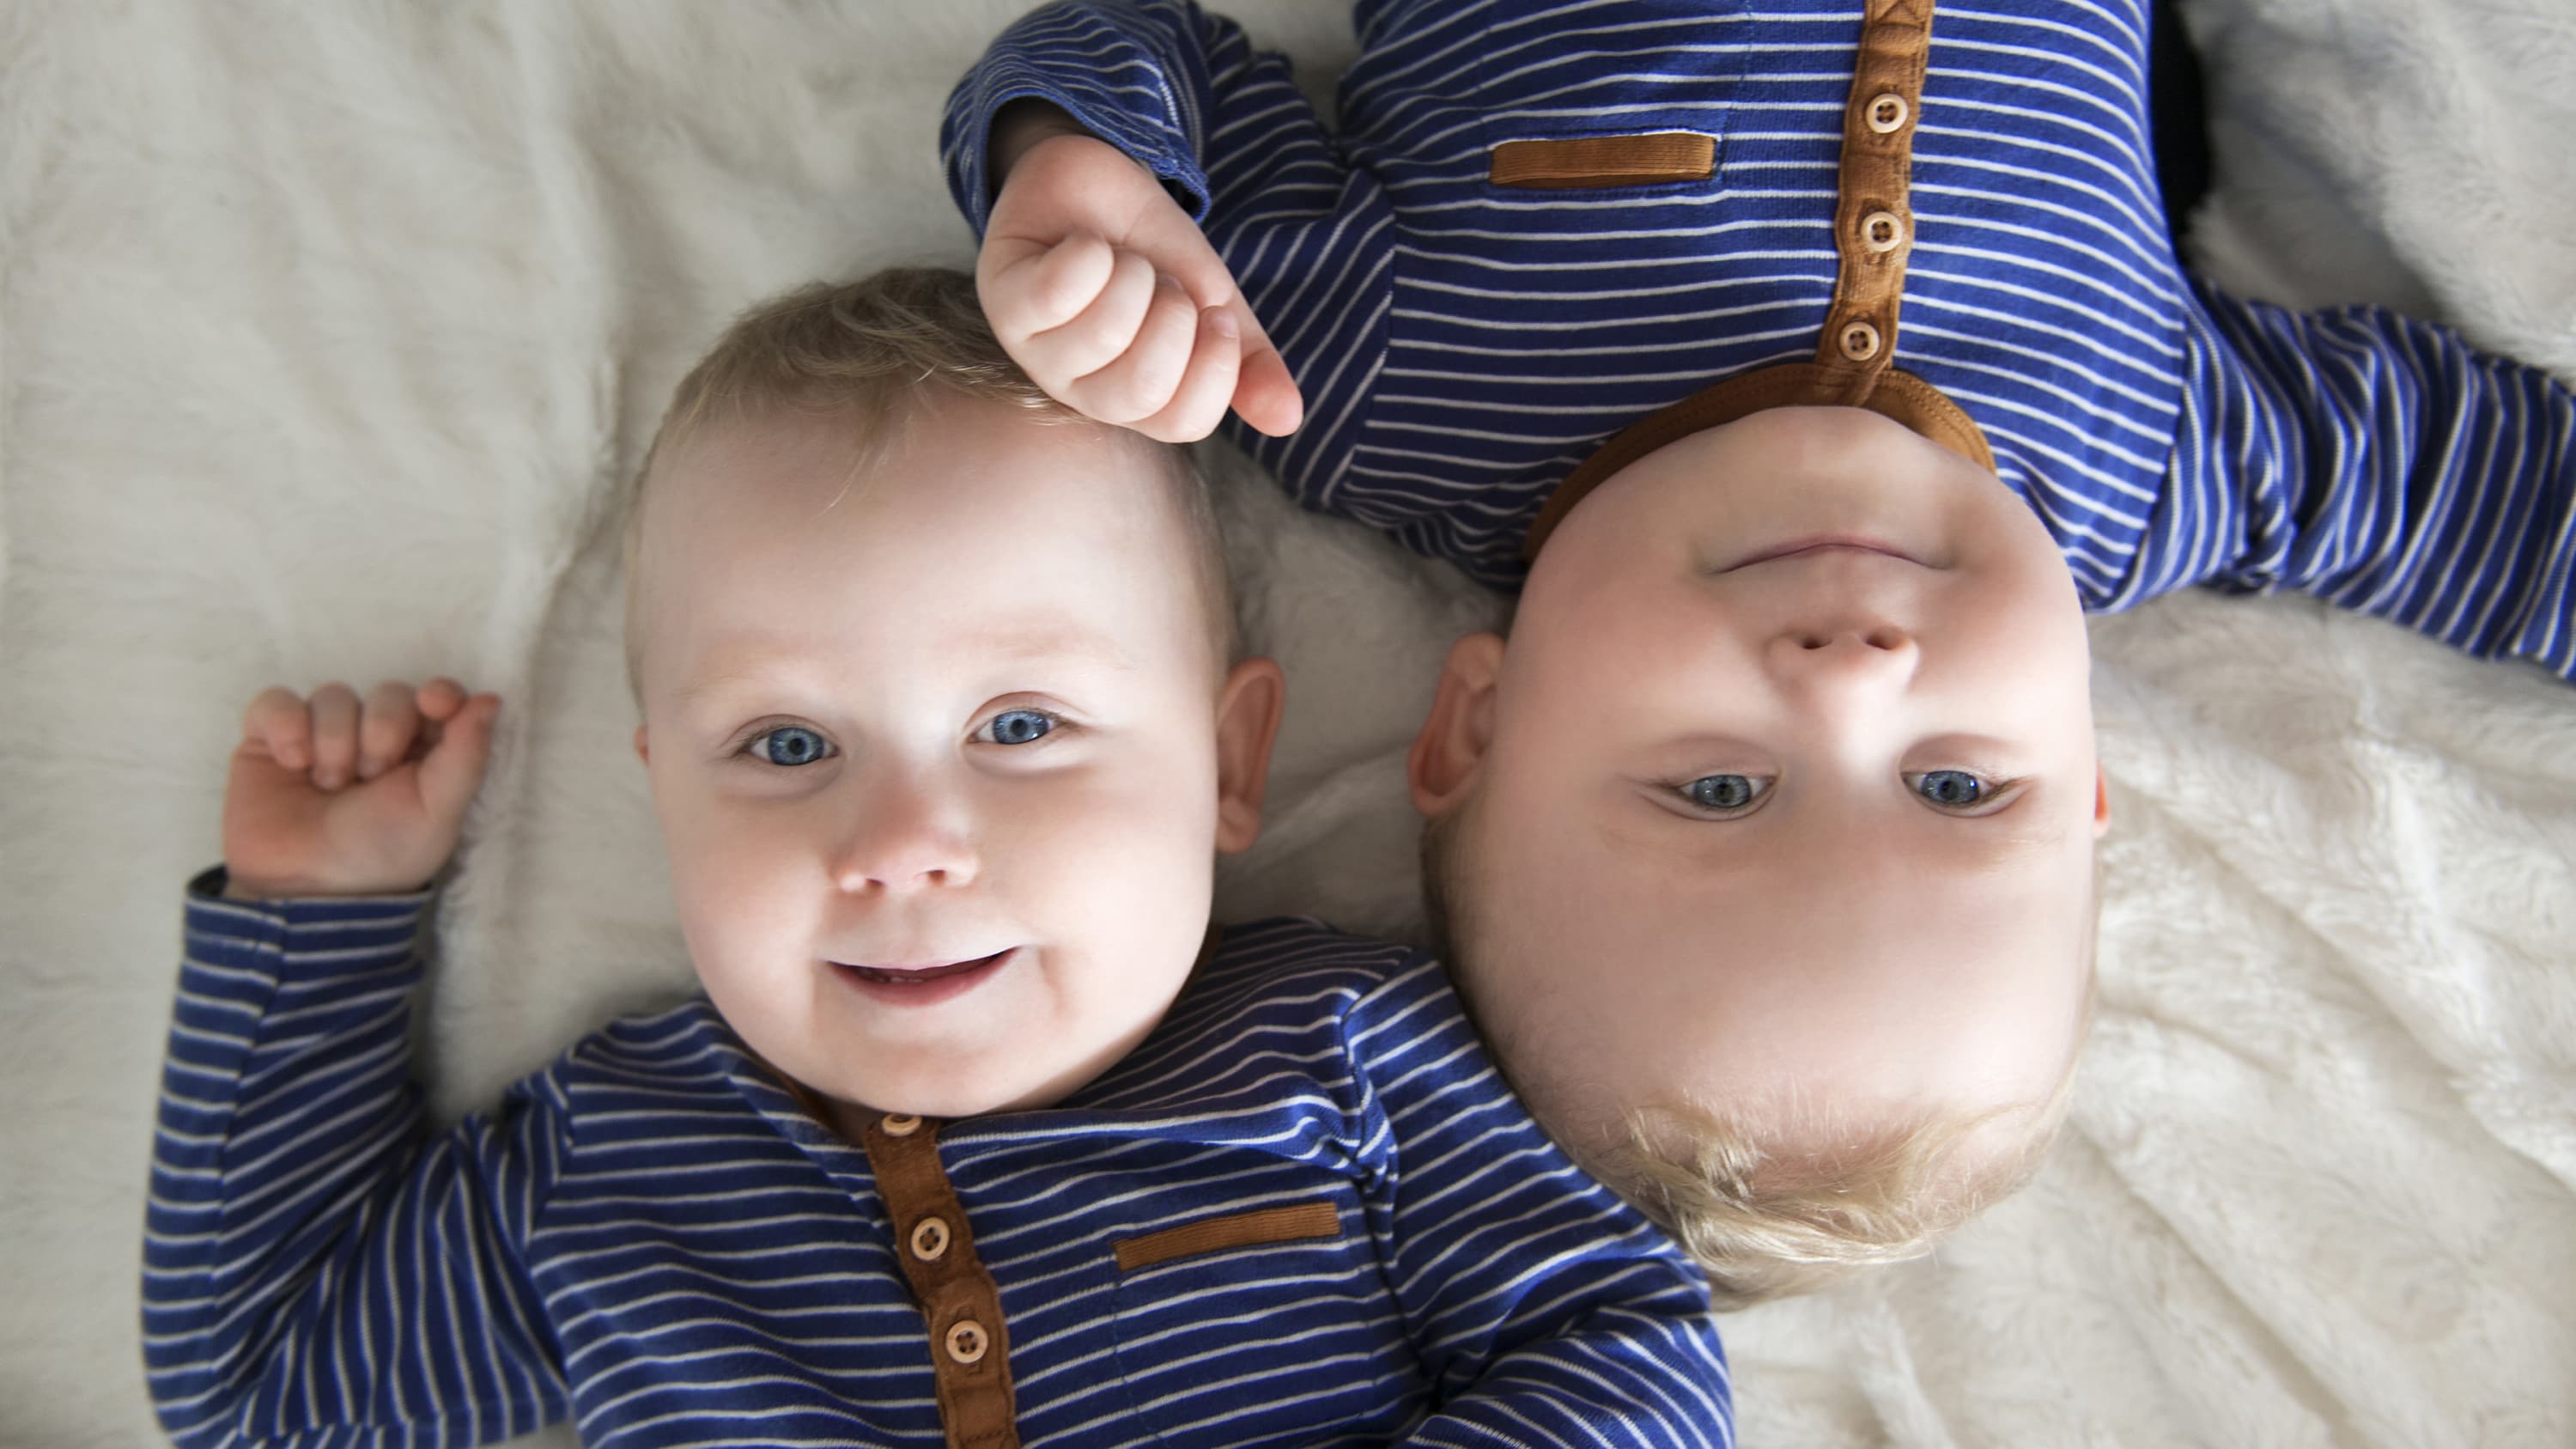 Twin boys, possibly after treatment for twin-to-twin transfusion syndrome